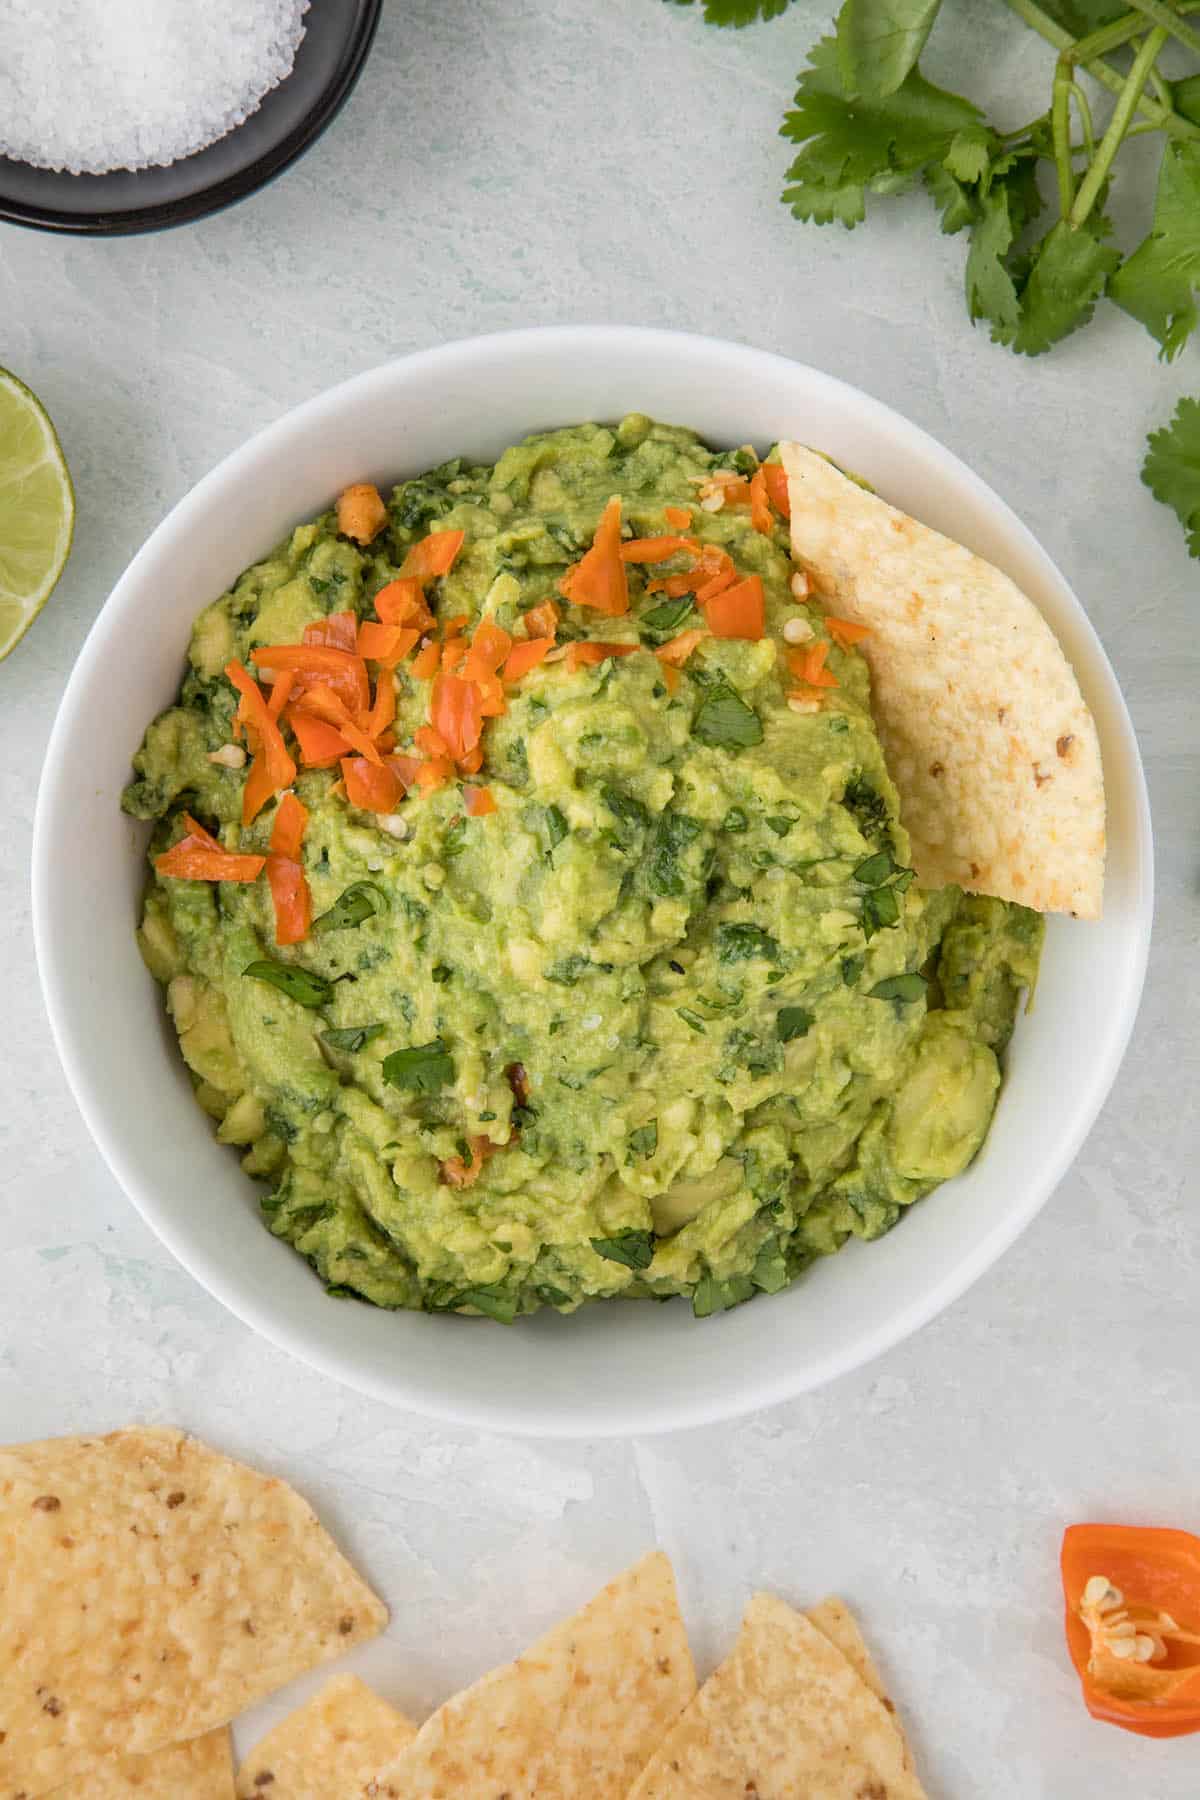 Spicy guacamole with habanero peppers in a bowl, ready to serve